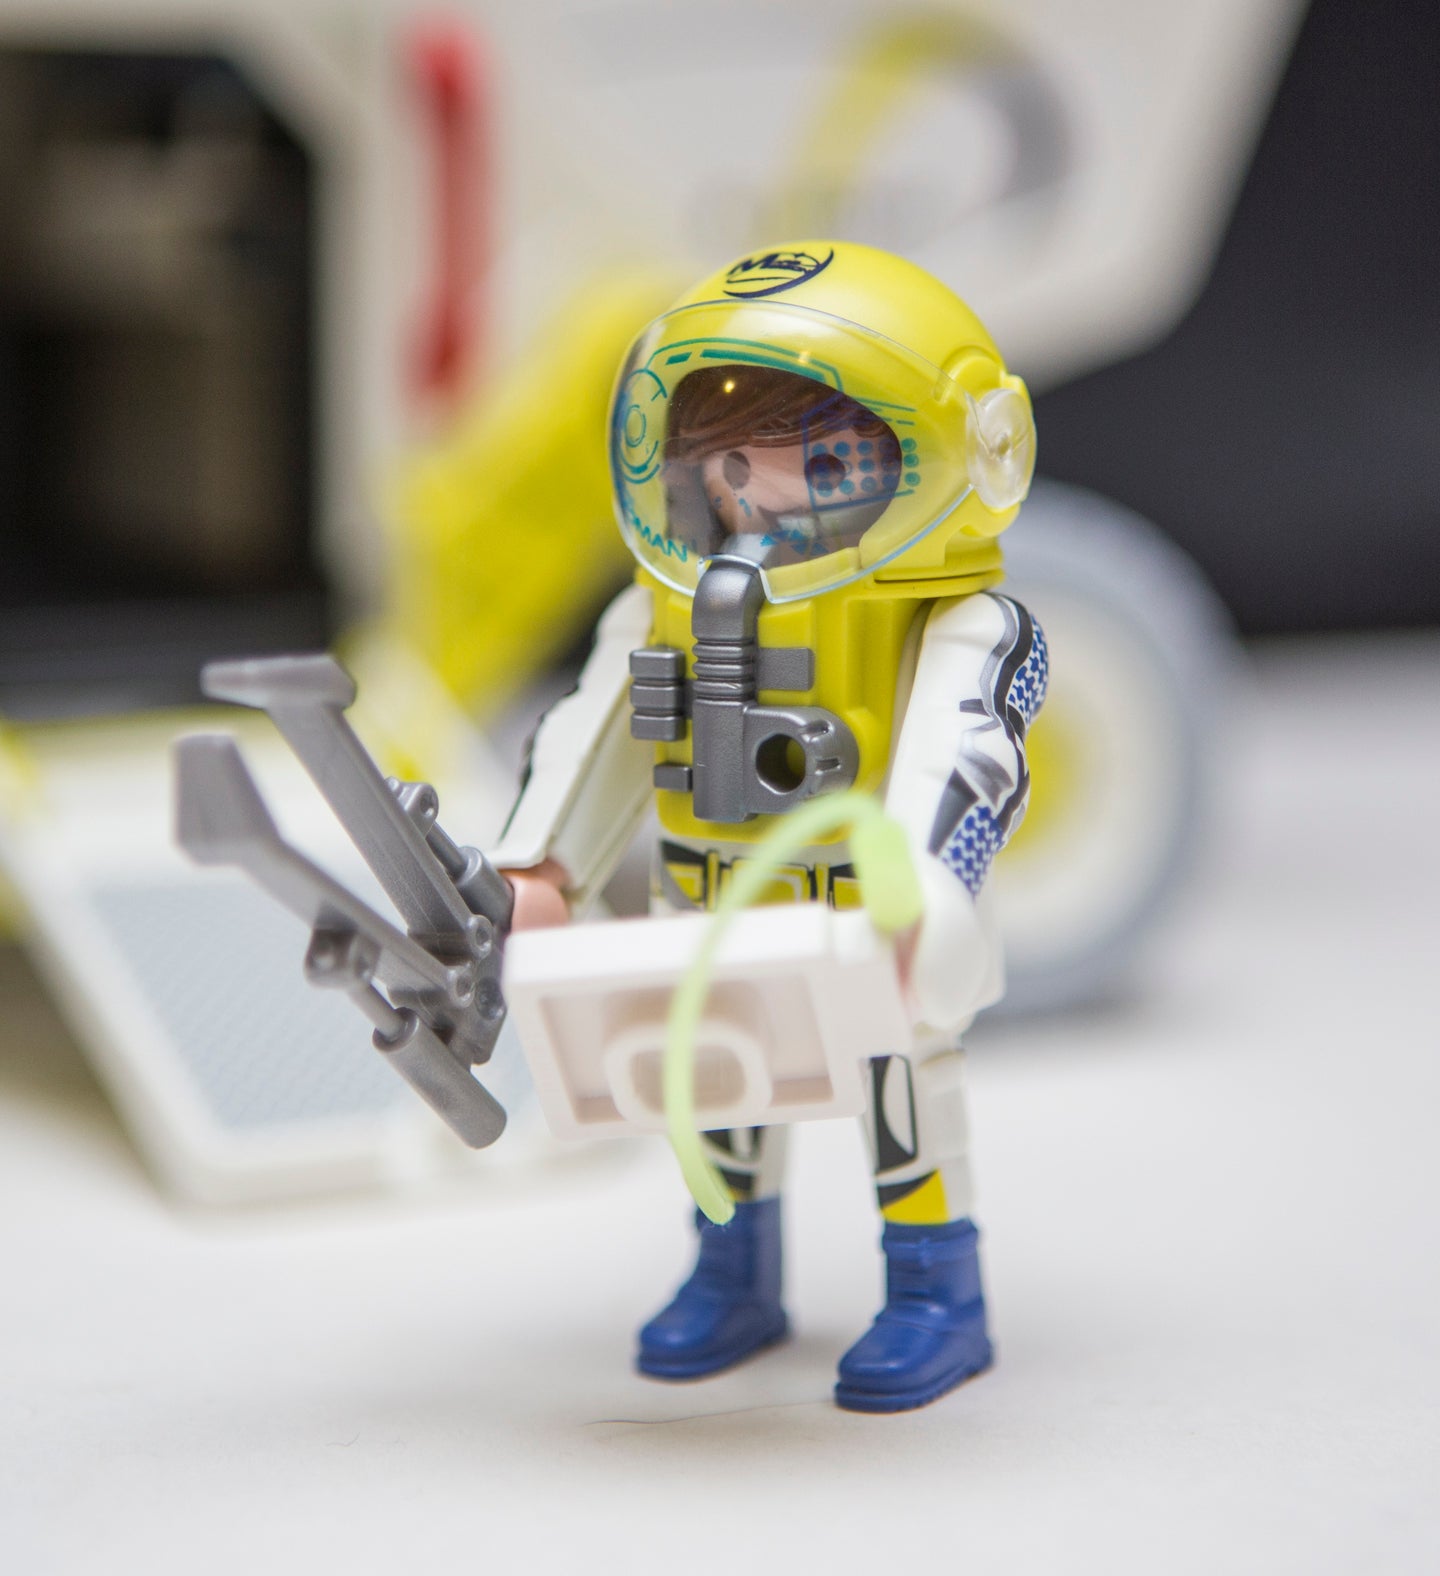 REVIEW: Playmobil Launches a Mission to Mars | Figures.com